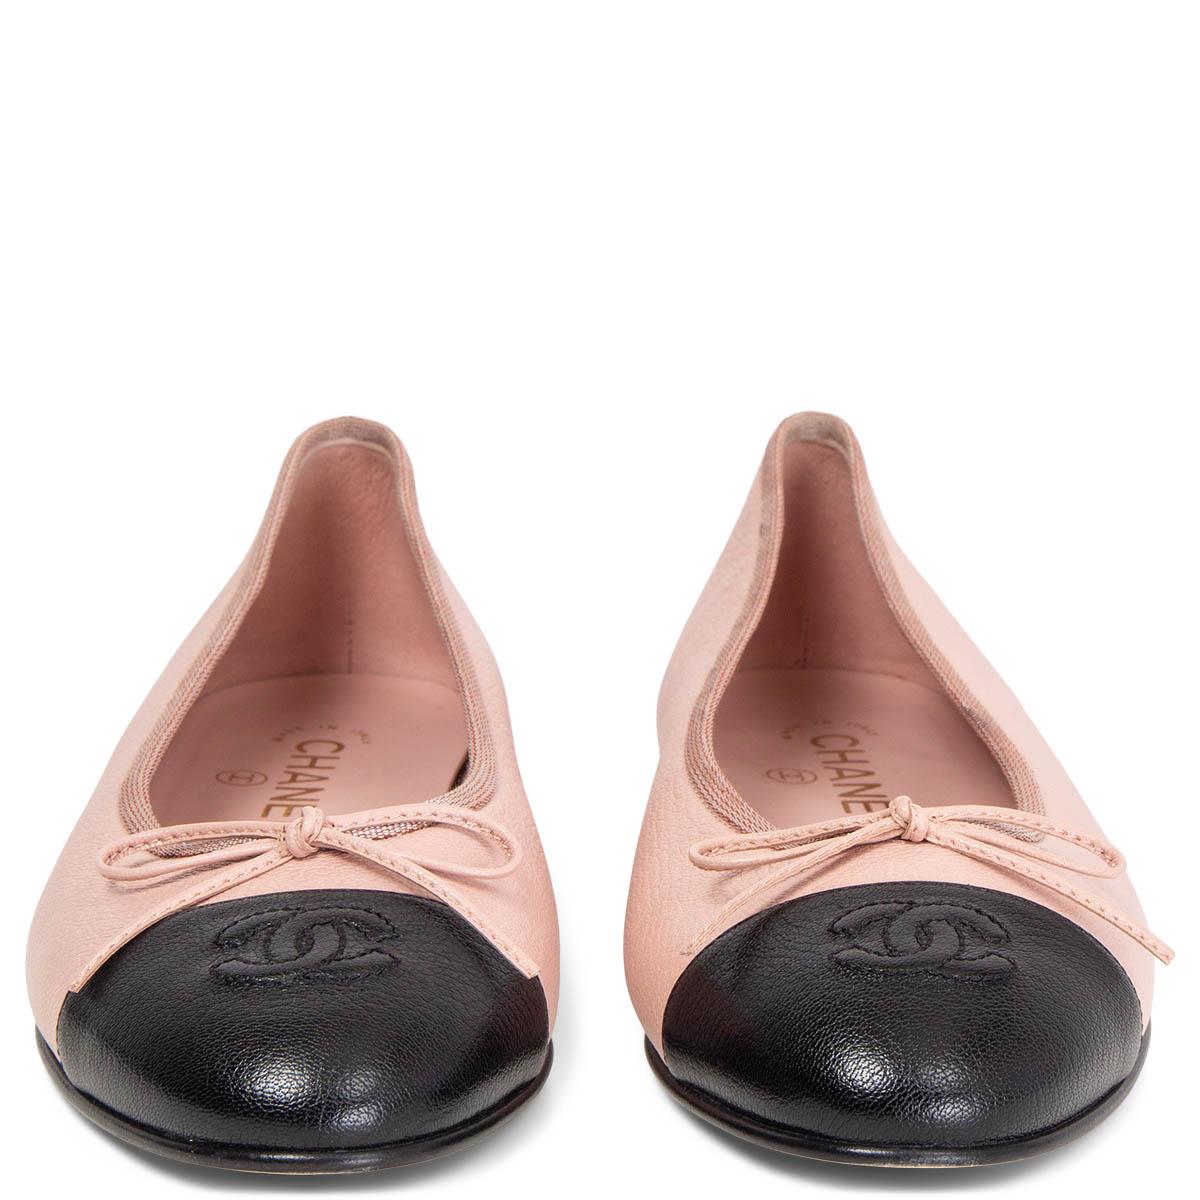 100% authentic Chanel classic ballet flats in pale pink grained calfskin with a black CC cap. Have been worn once and are in excellent condition. Come with dust bags. 

Measurements
Imprinted Size	38.5
Shoe Size	38.5
Inside Sole	24.5cm